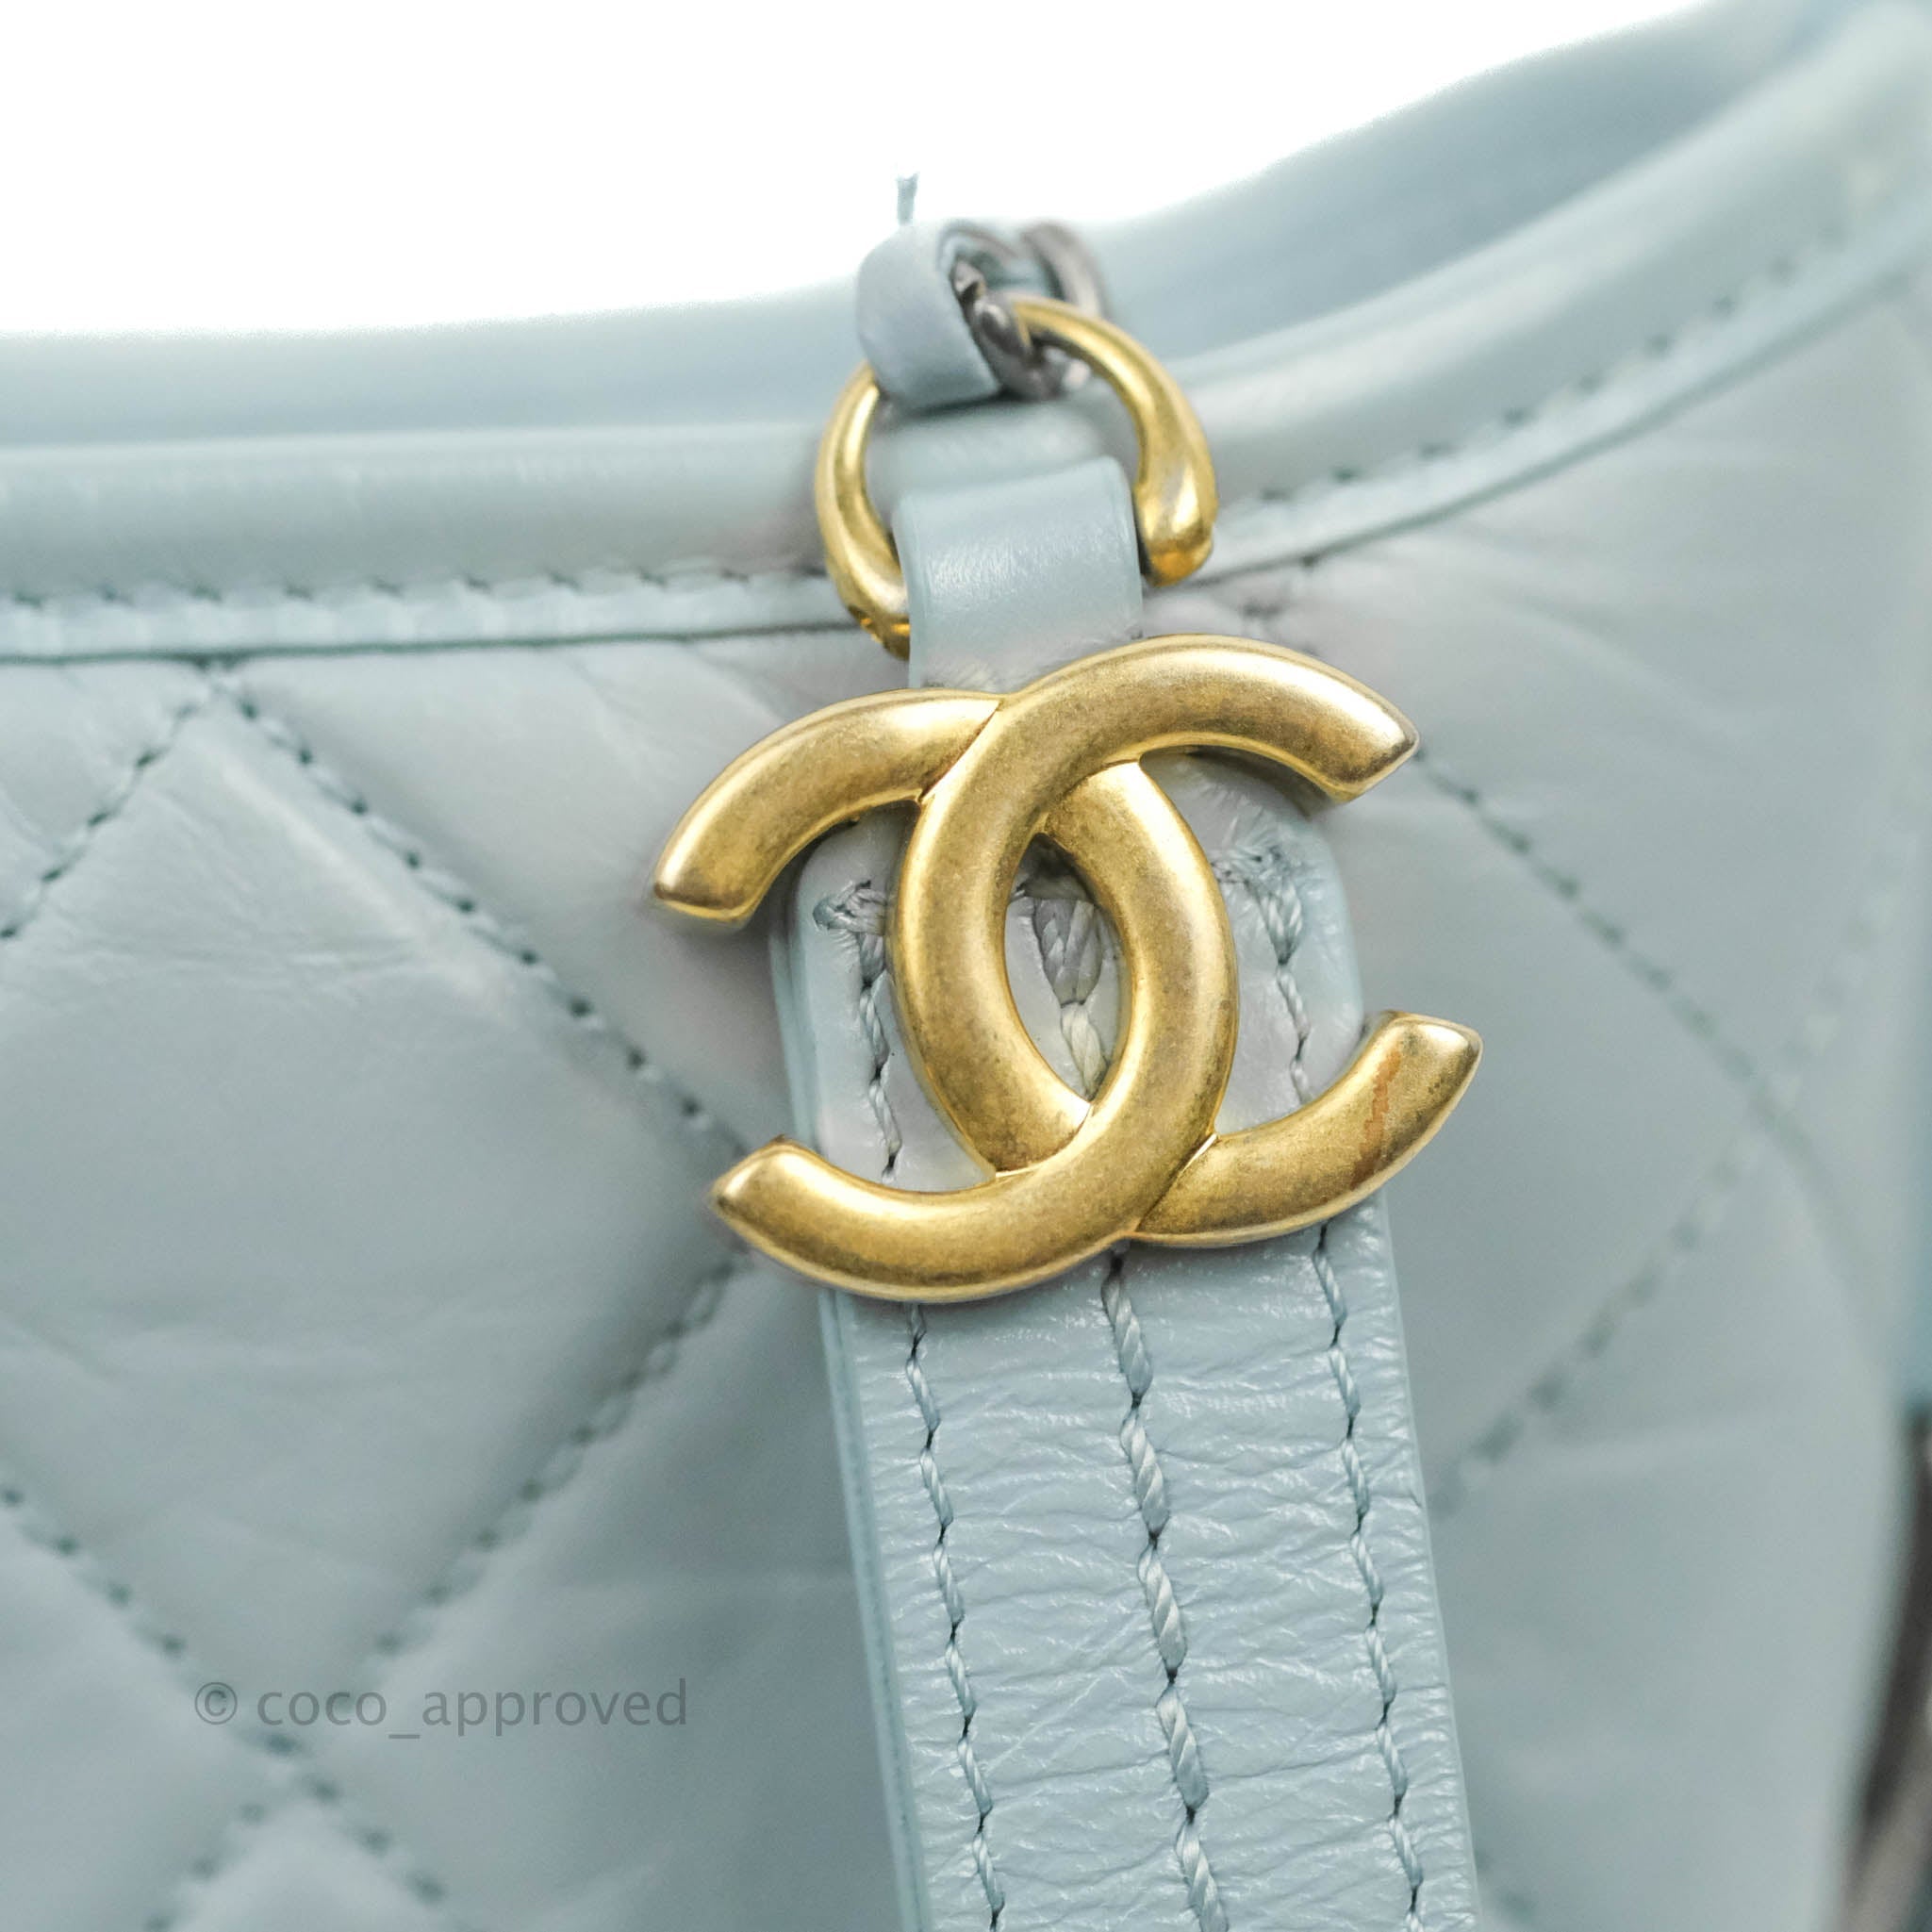 1000% AUTH! RARE🦄 Chanel Gabrielle Baby Blue Grey 💙🤍 Hobo